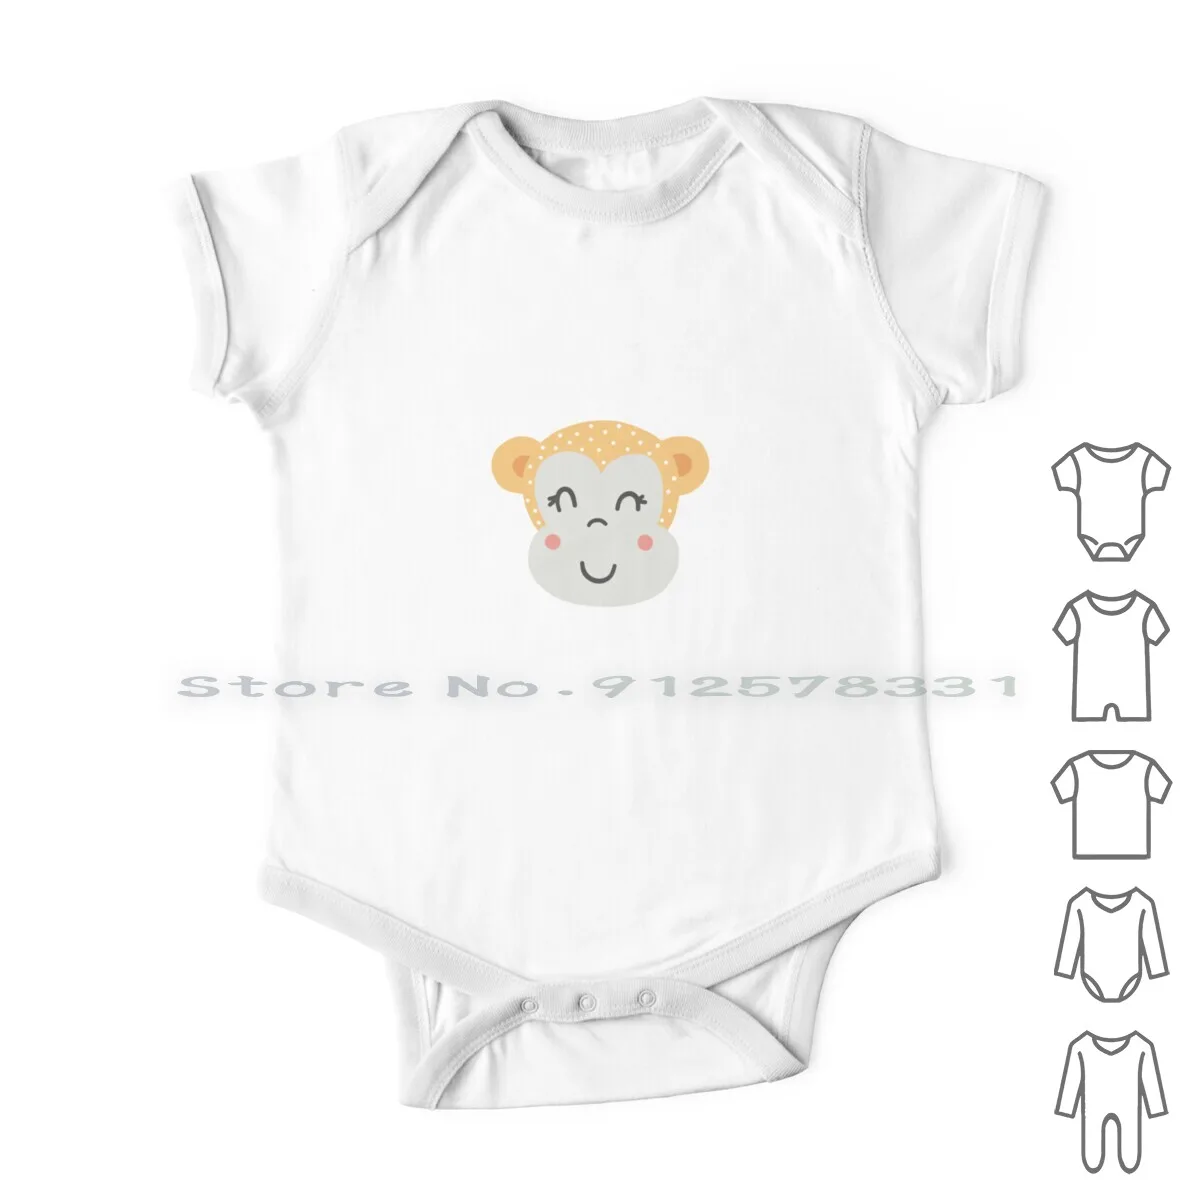 

Cute Animal Smiling Newborn Baby Clothes Rompers Cotton Jumpsuits Animal Cute Baby Cub Wild Little Cartoon Doodle Hug Smile